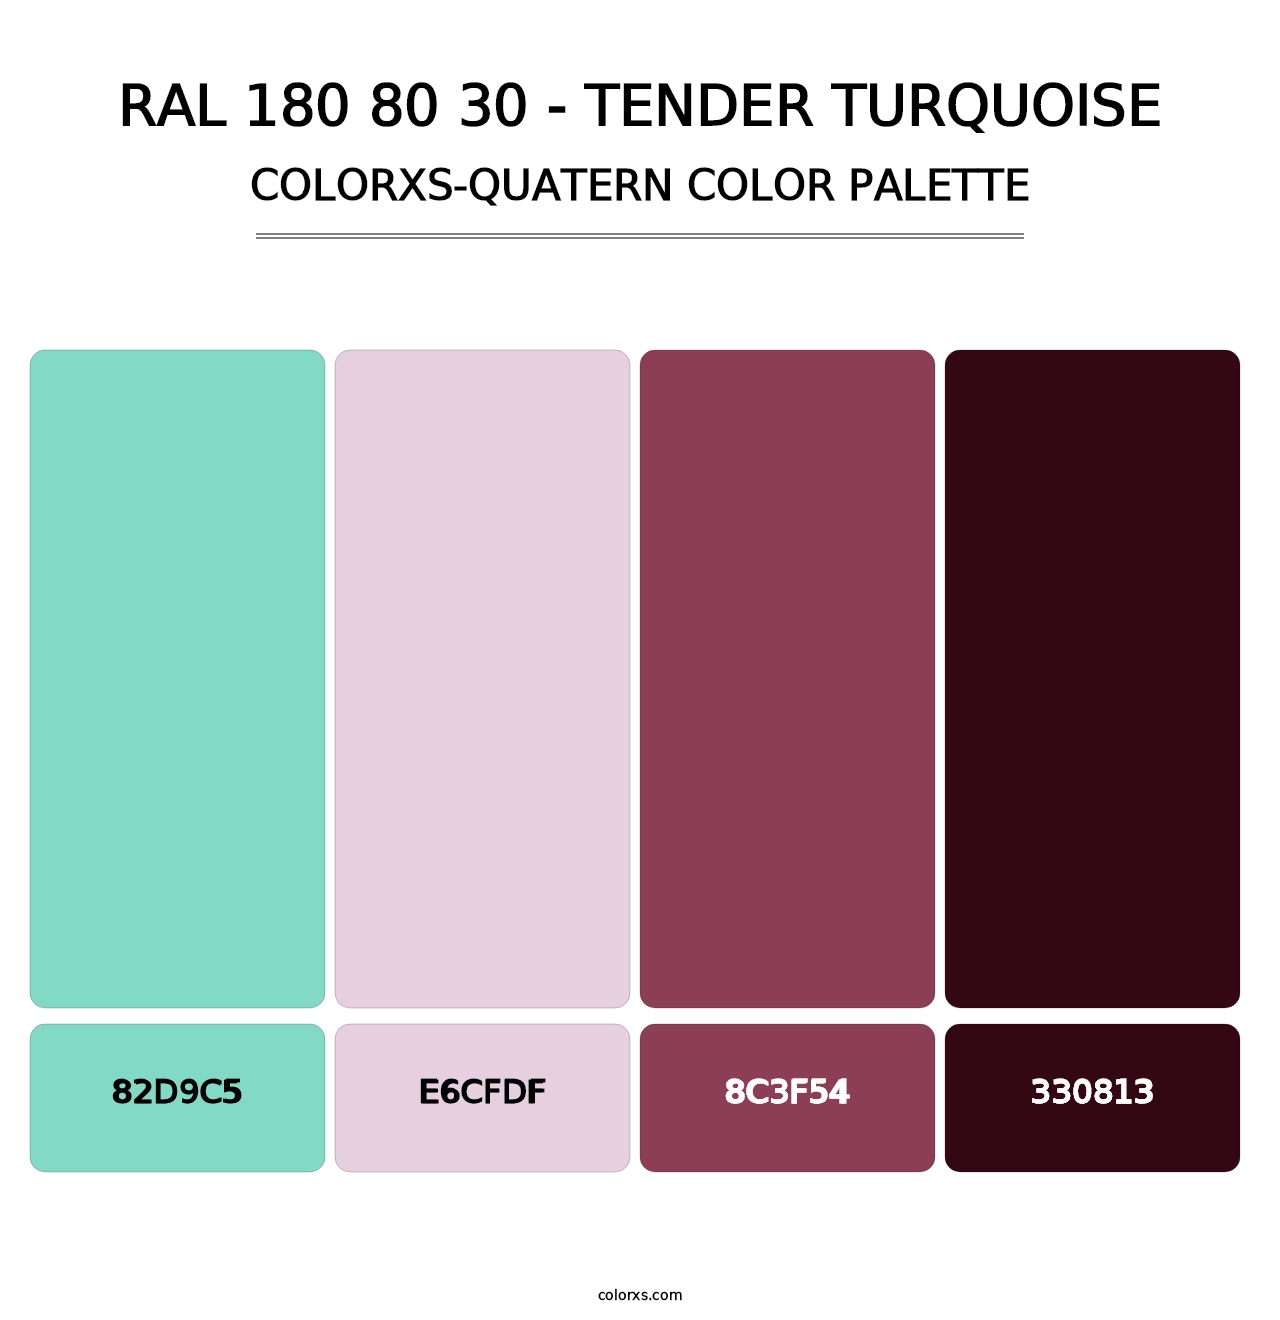 RAL 180 80 30 - Tender Turquoise - Colorxs Quatern Palette